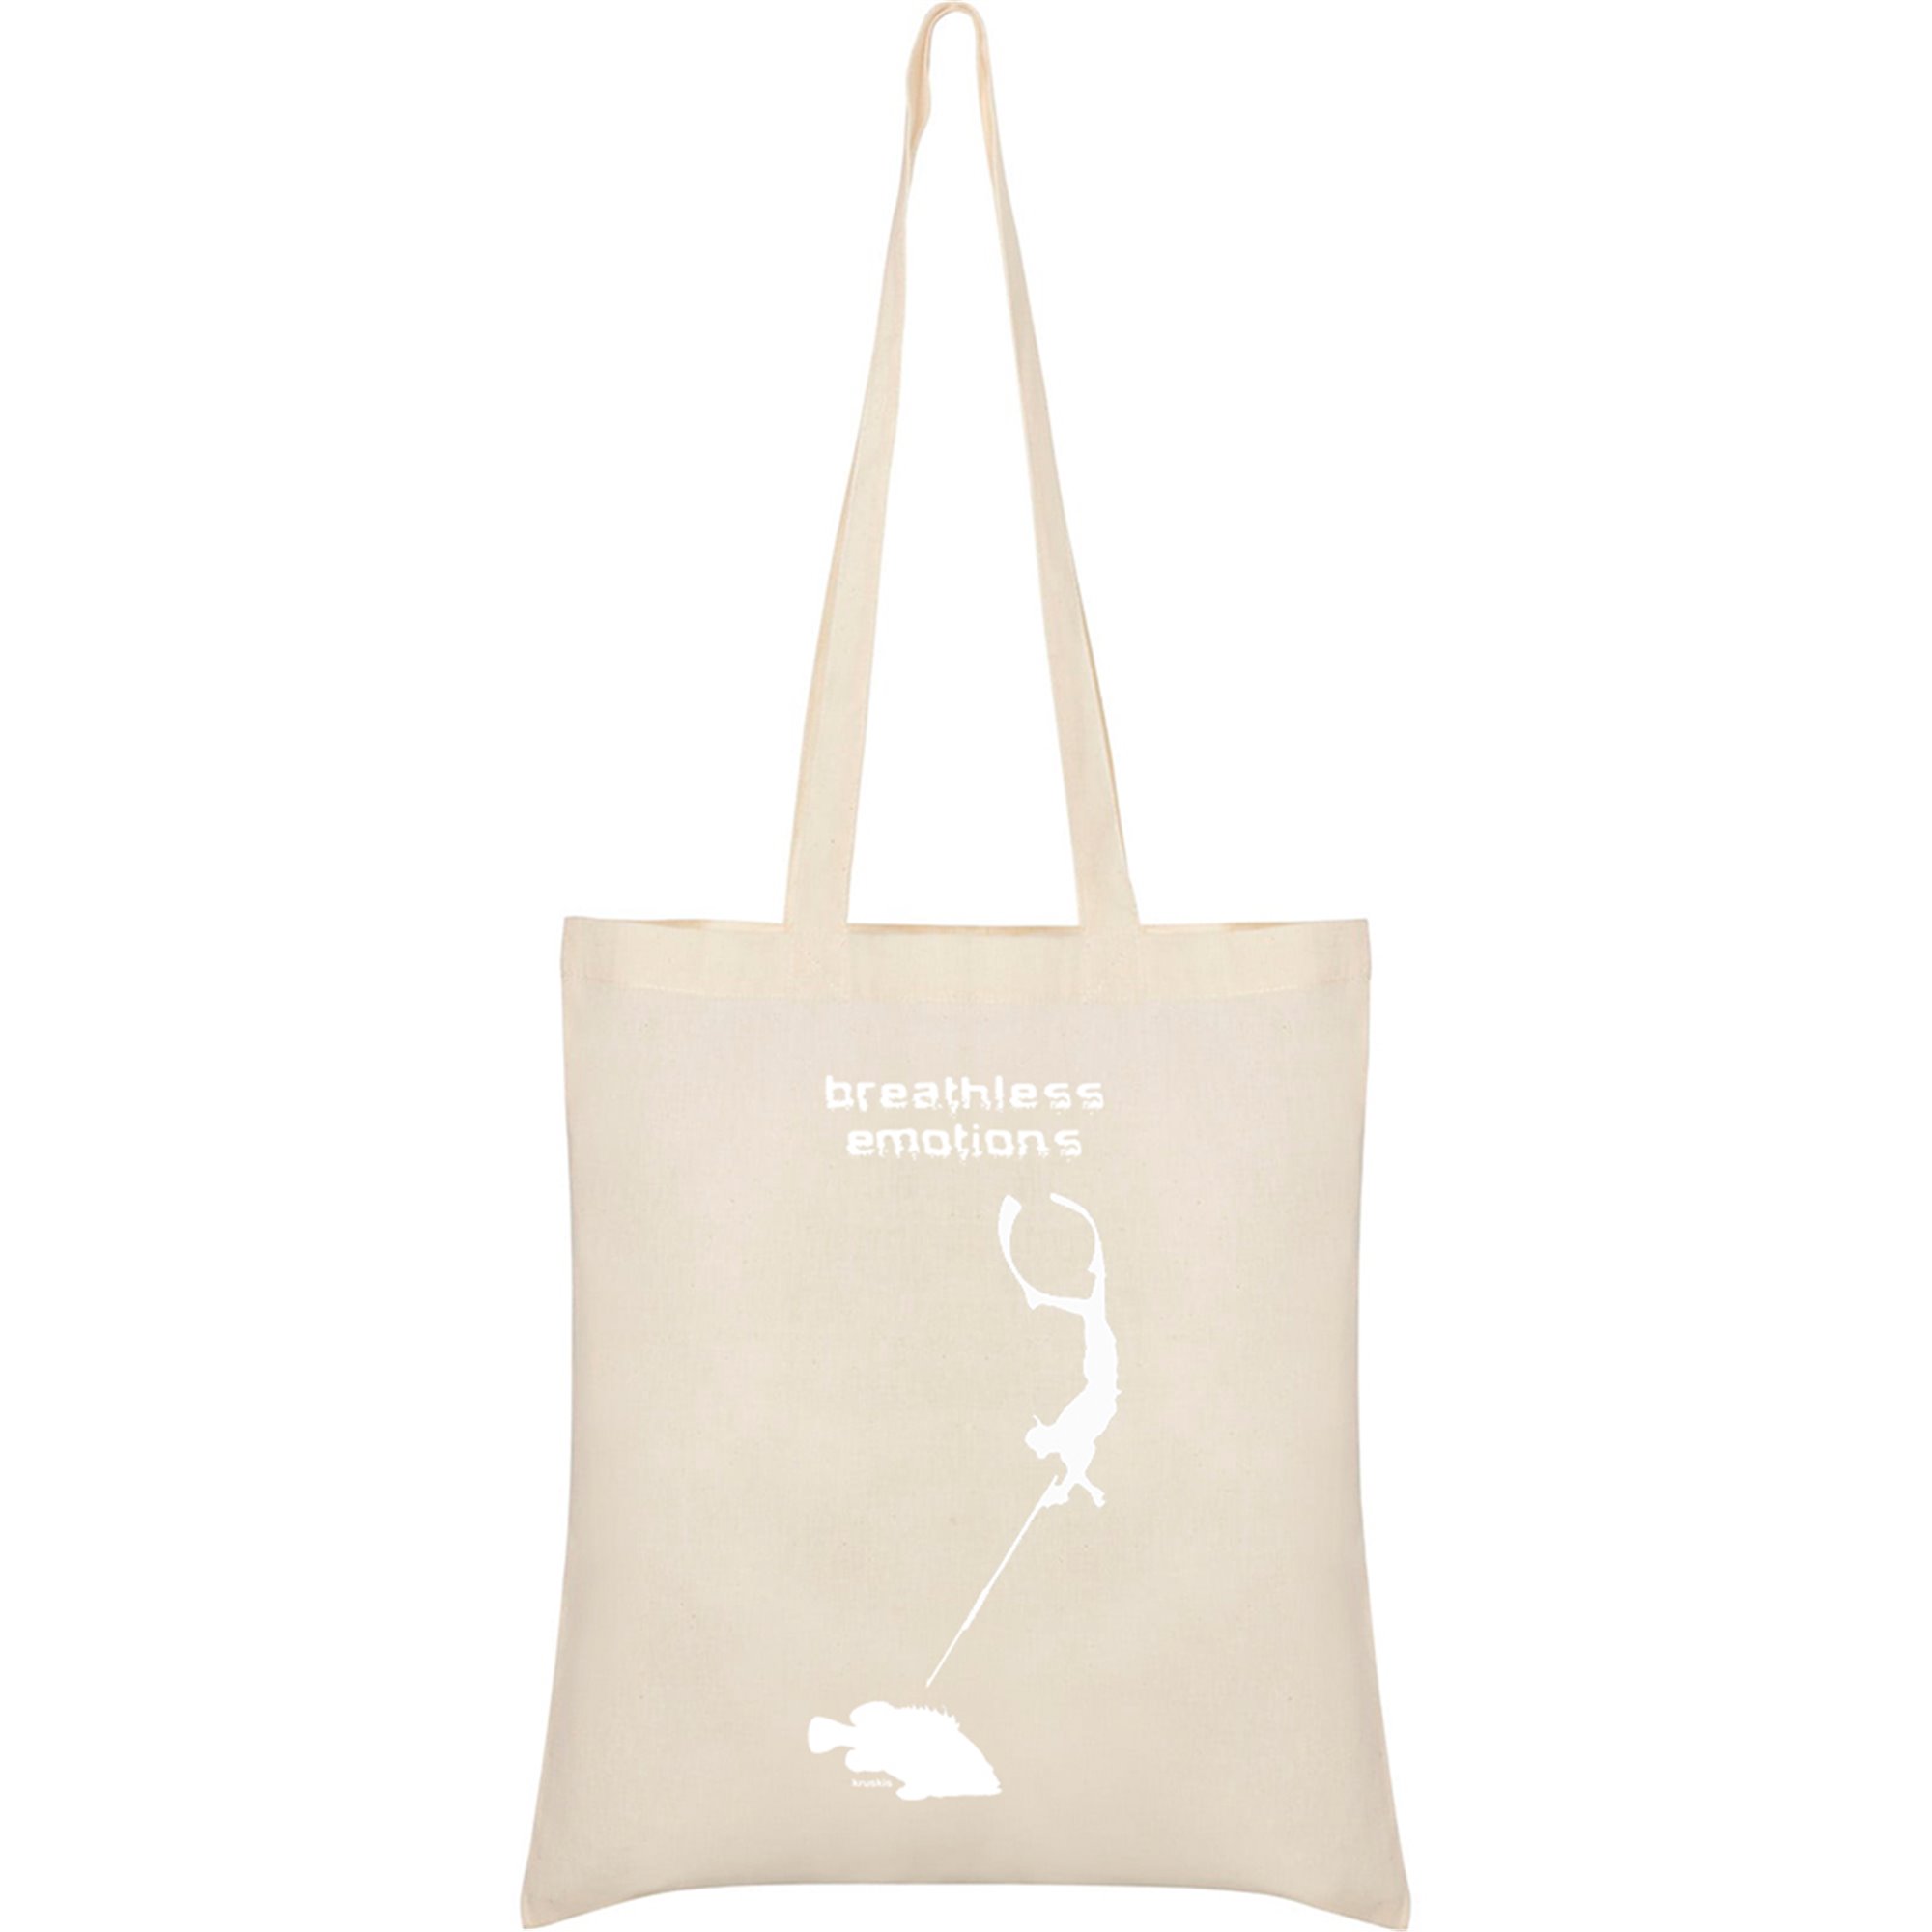 Sac Coton Chasse sous marine Breathless Emotions